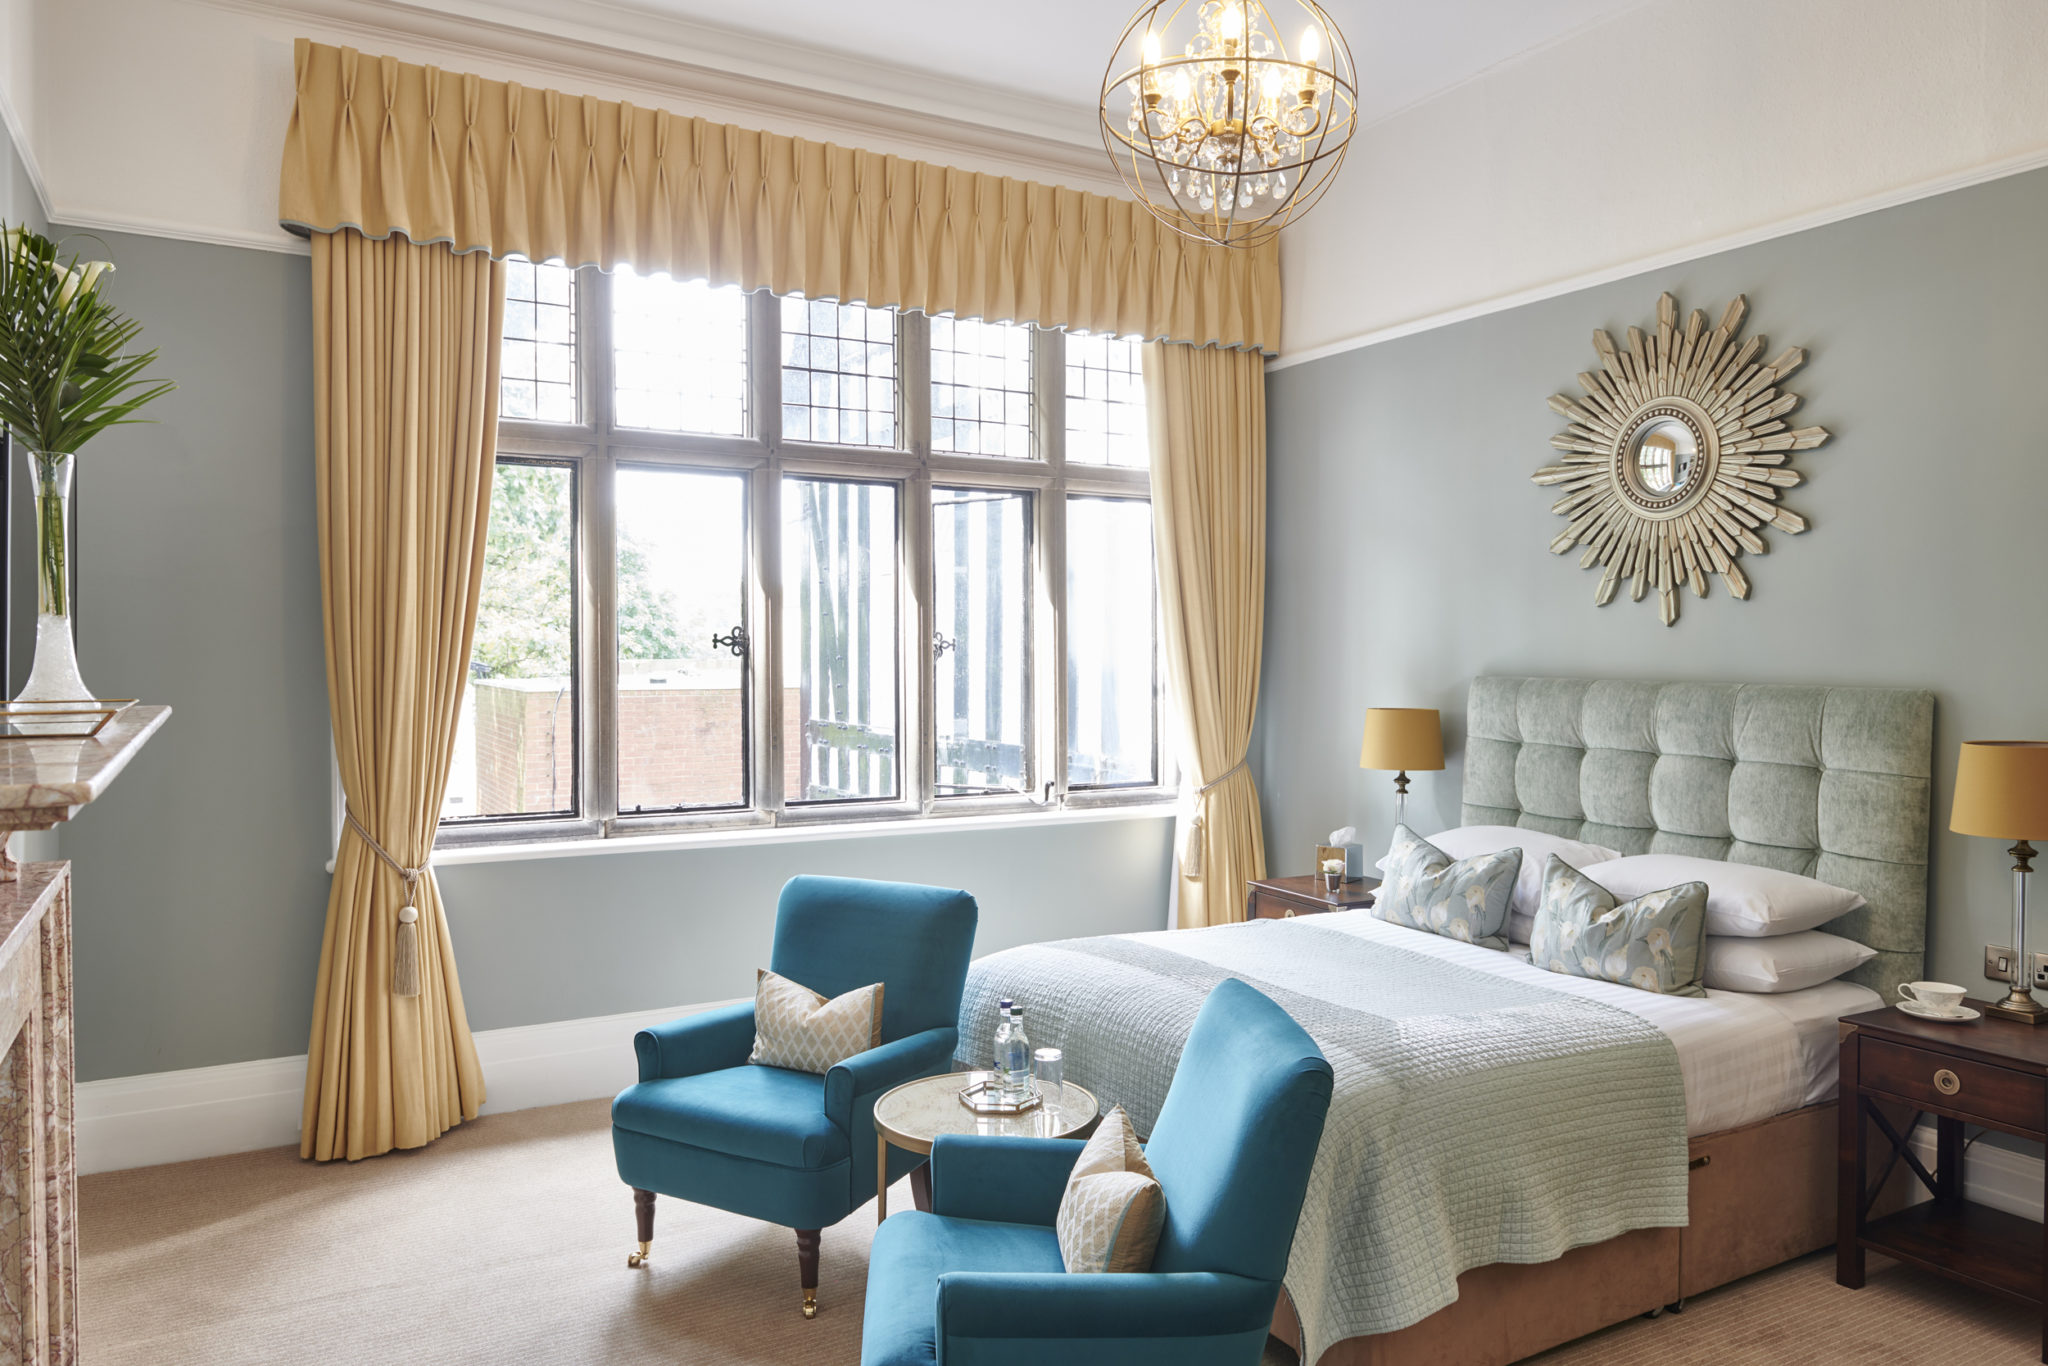 ﻿The Chace Hotel Coventry to rebrand as a Laura Ashley Hotel